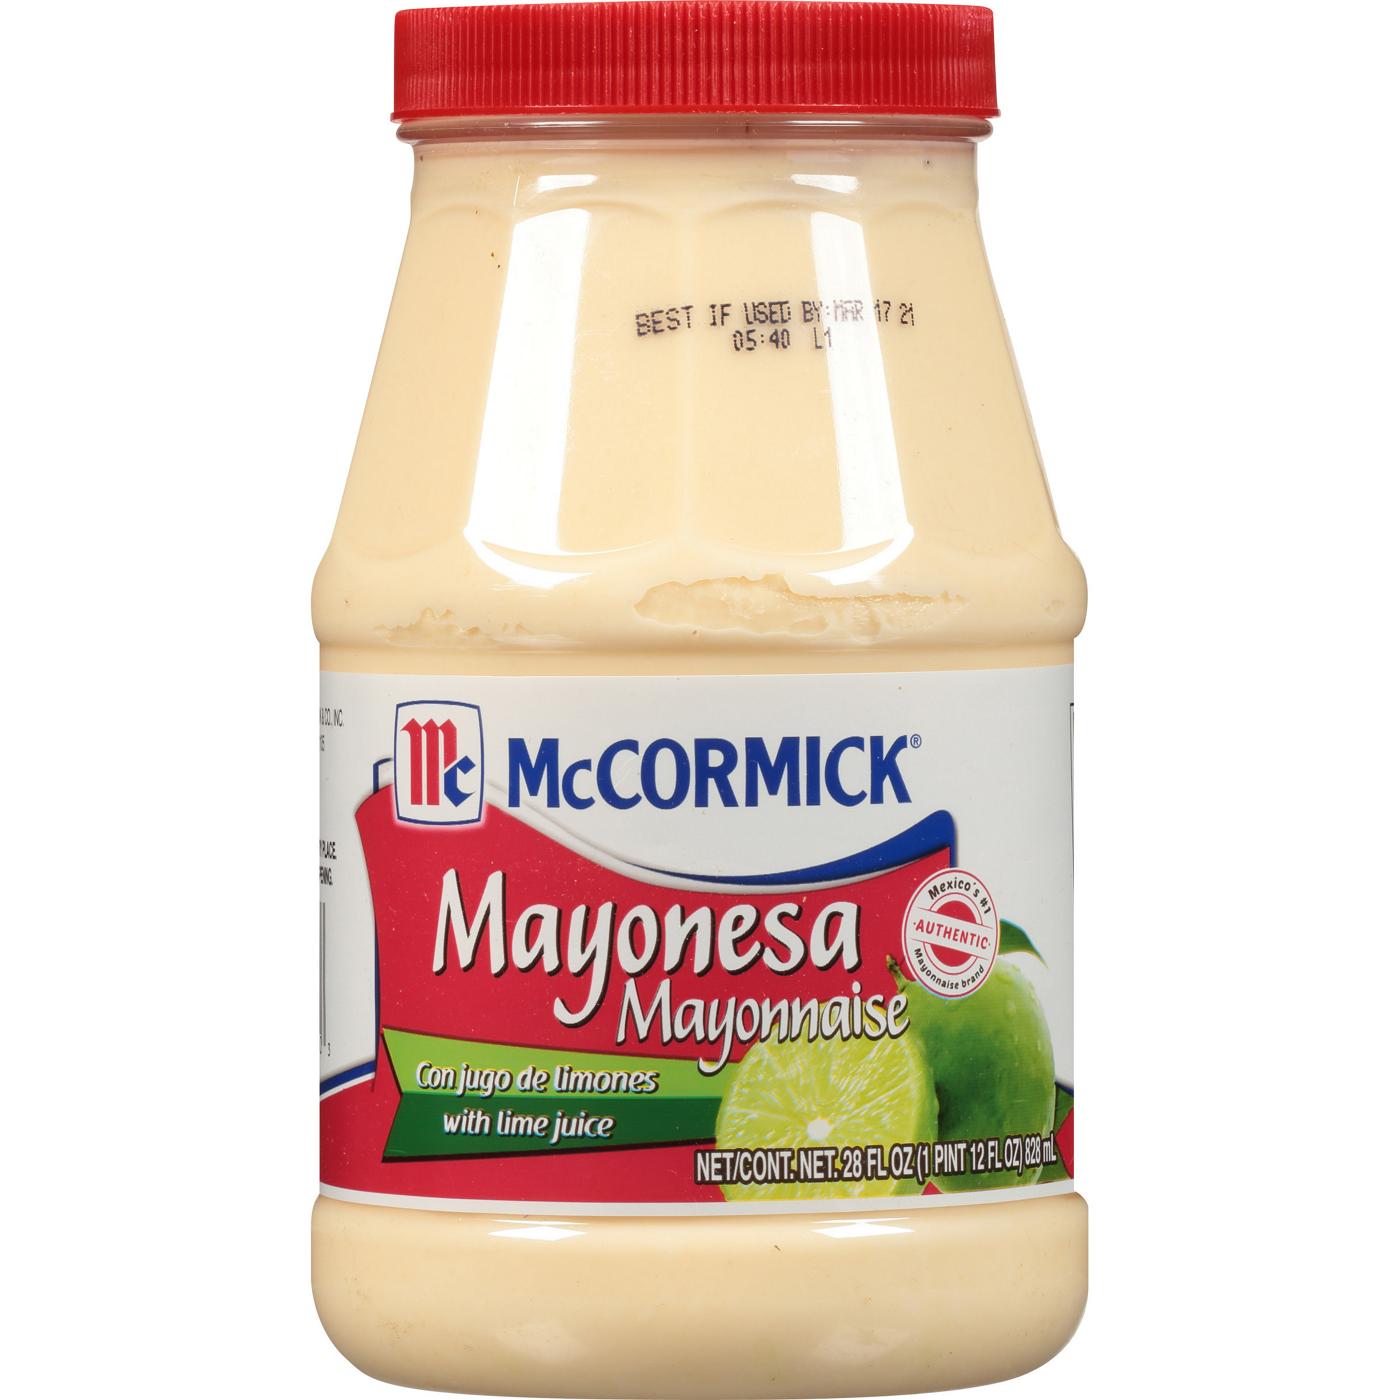 McCormick Mayonnaise with Lime Juice (62.5 oz) Delivery - DoorDash